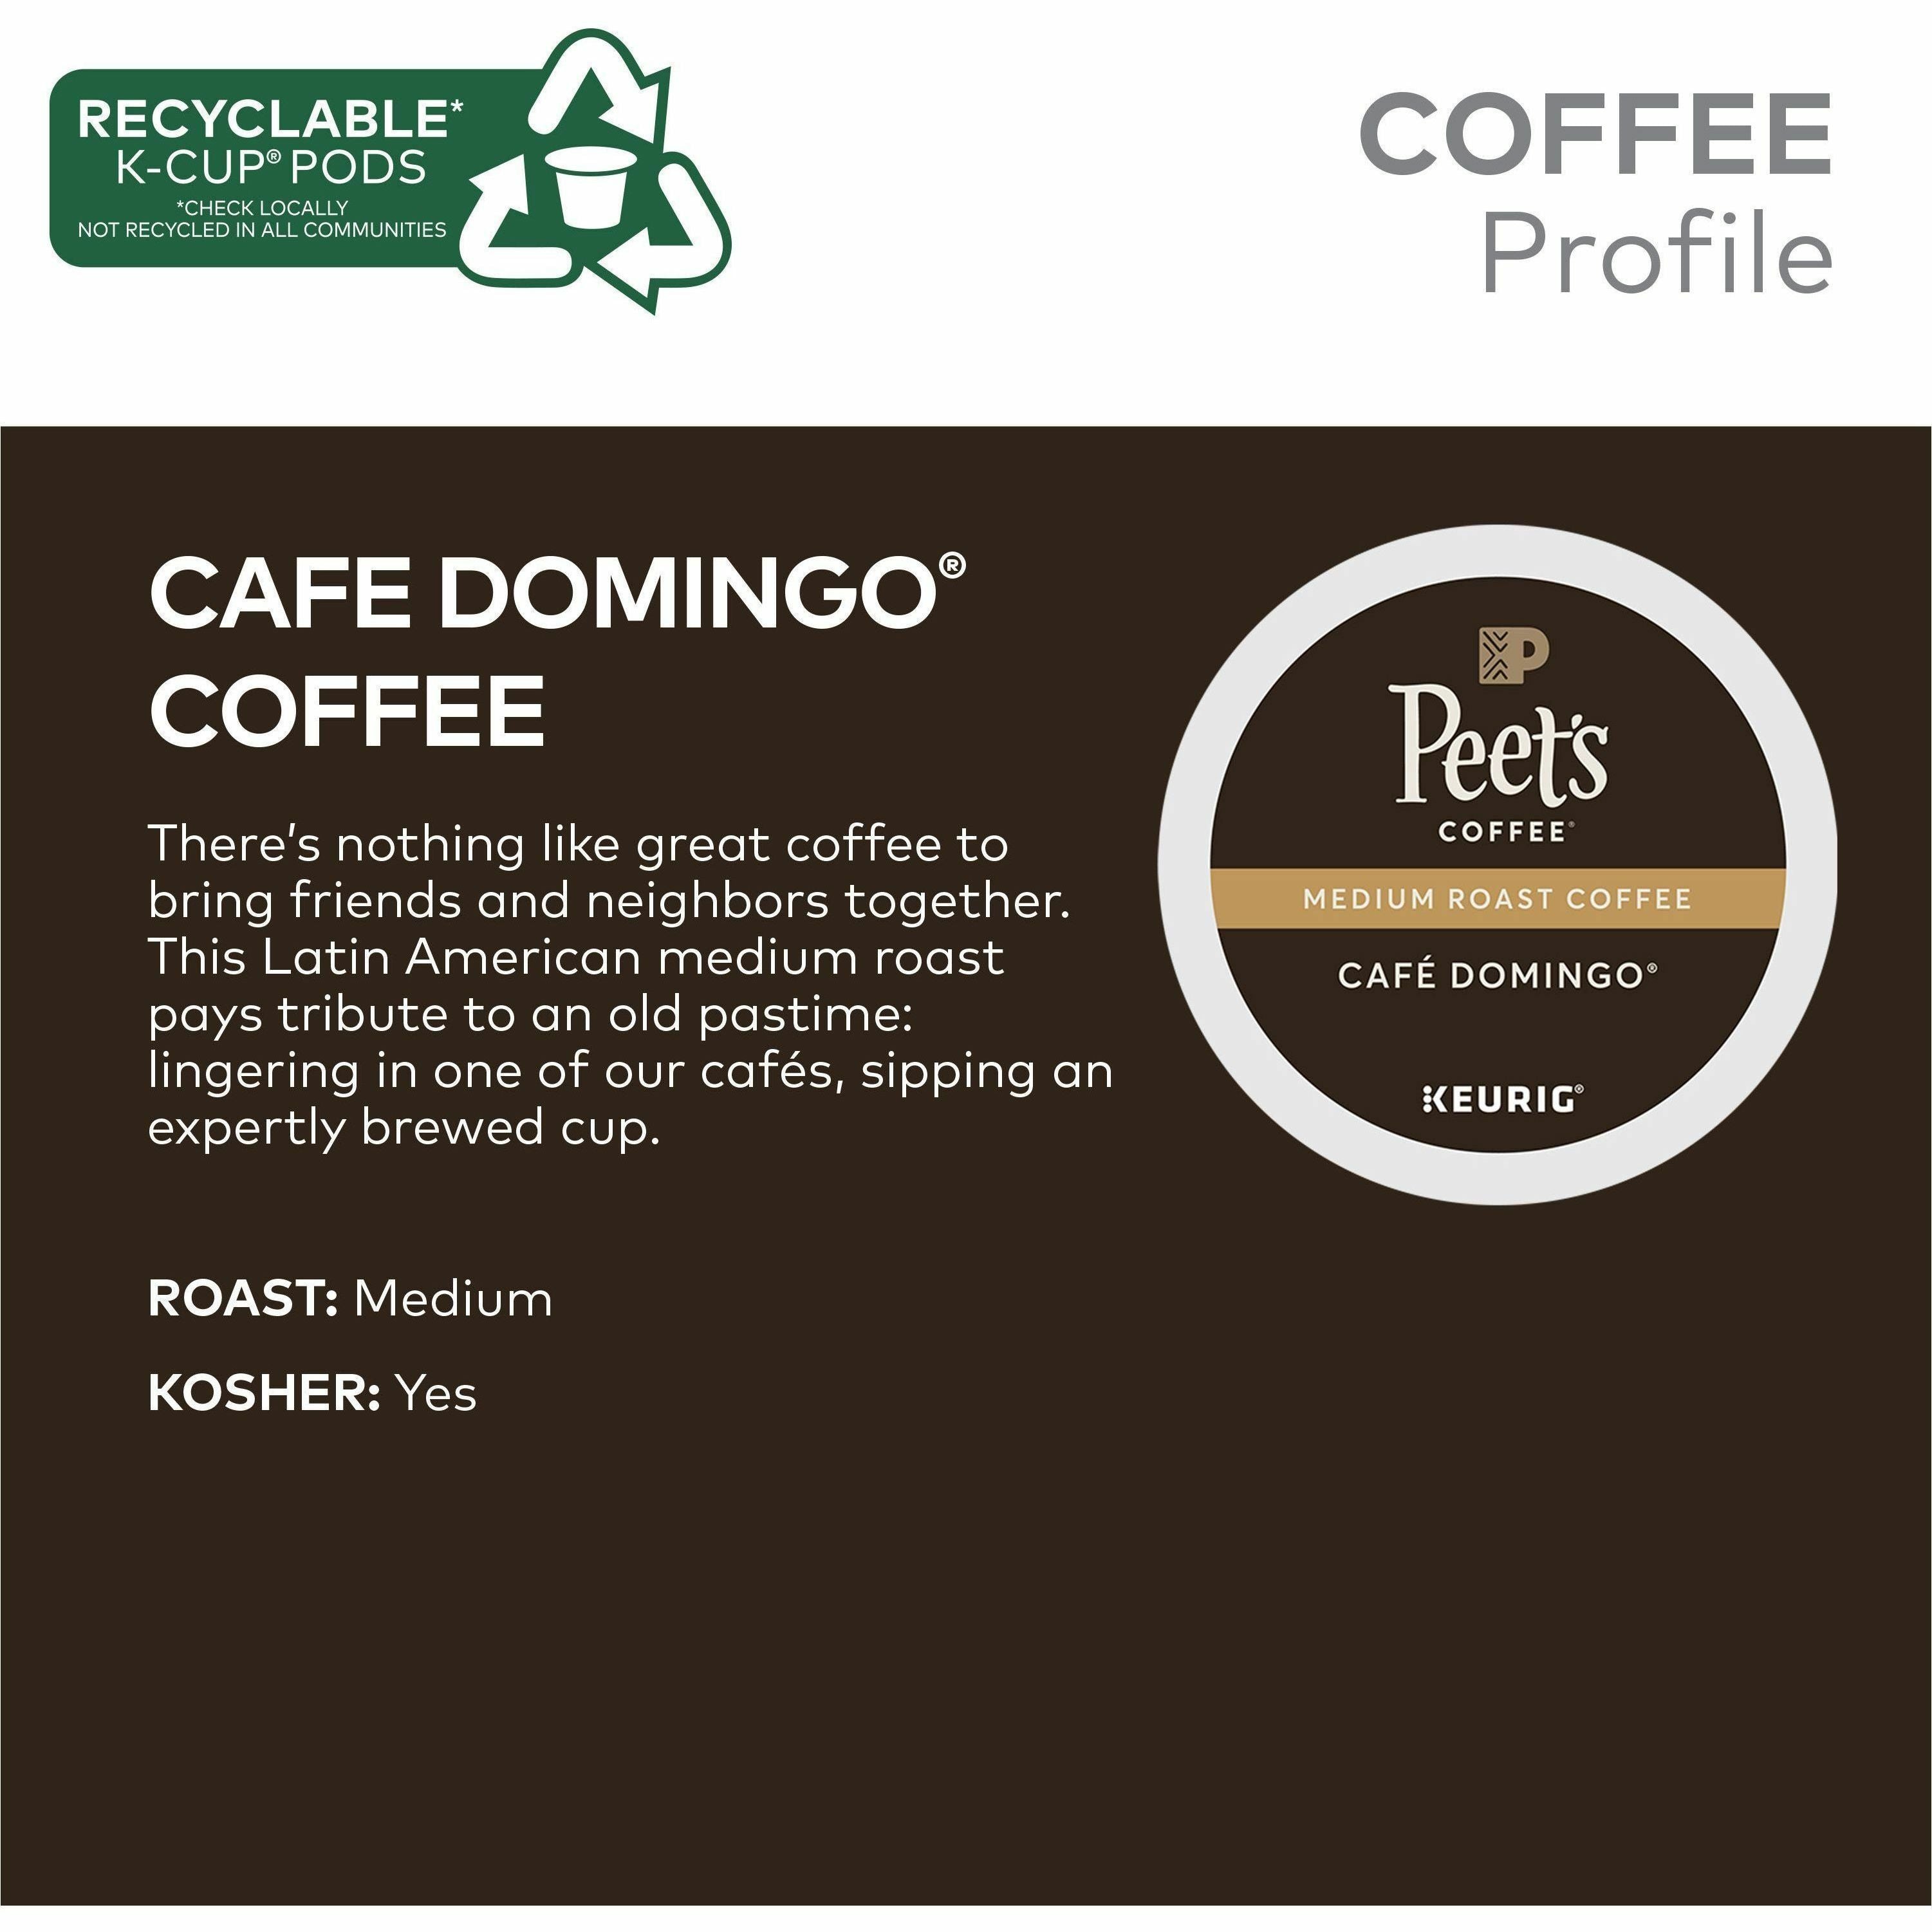 peets-coffee-k-cup-cafe-domingo-coffee-compatible-with-keurig-brewer-medium-22-box_gmt2404 - 2